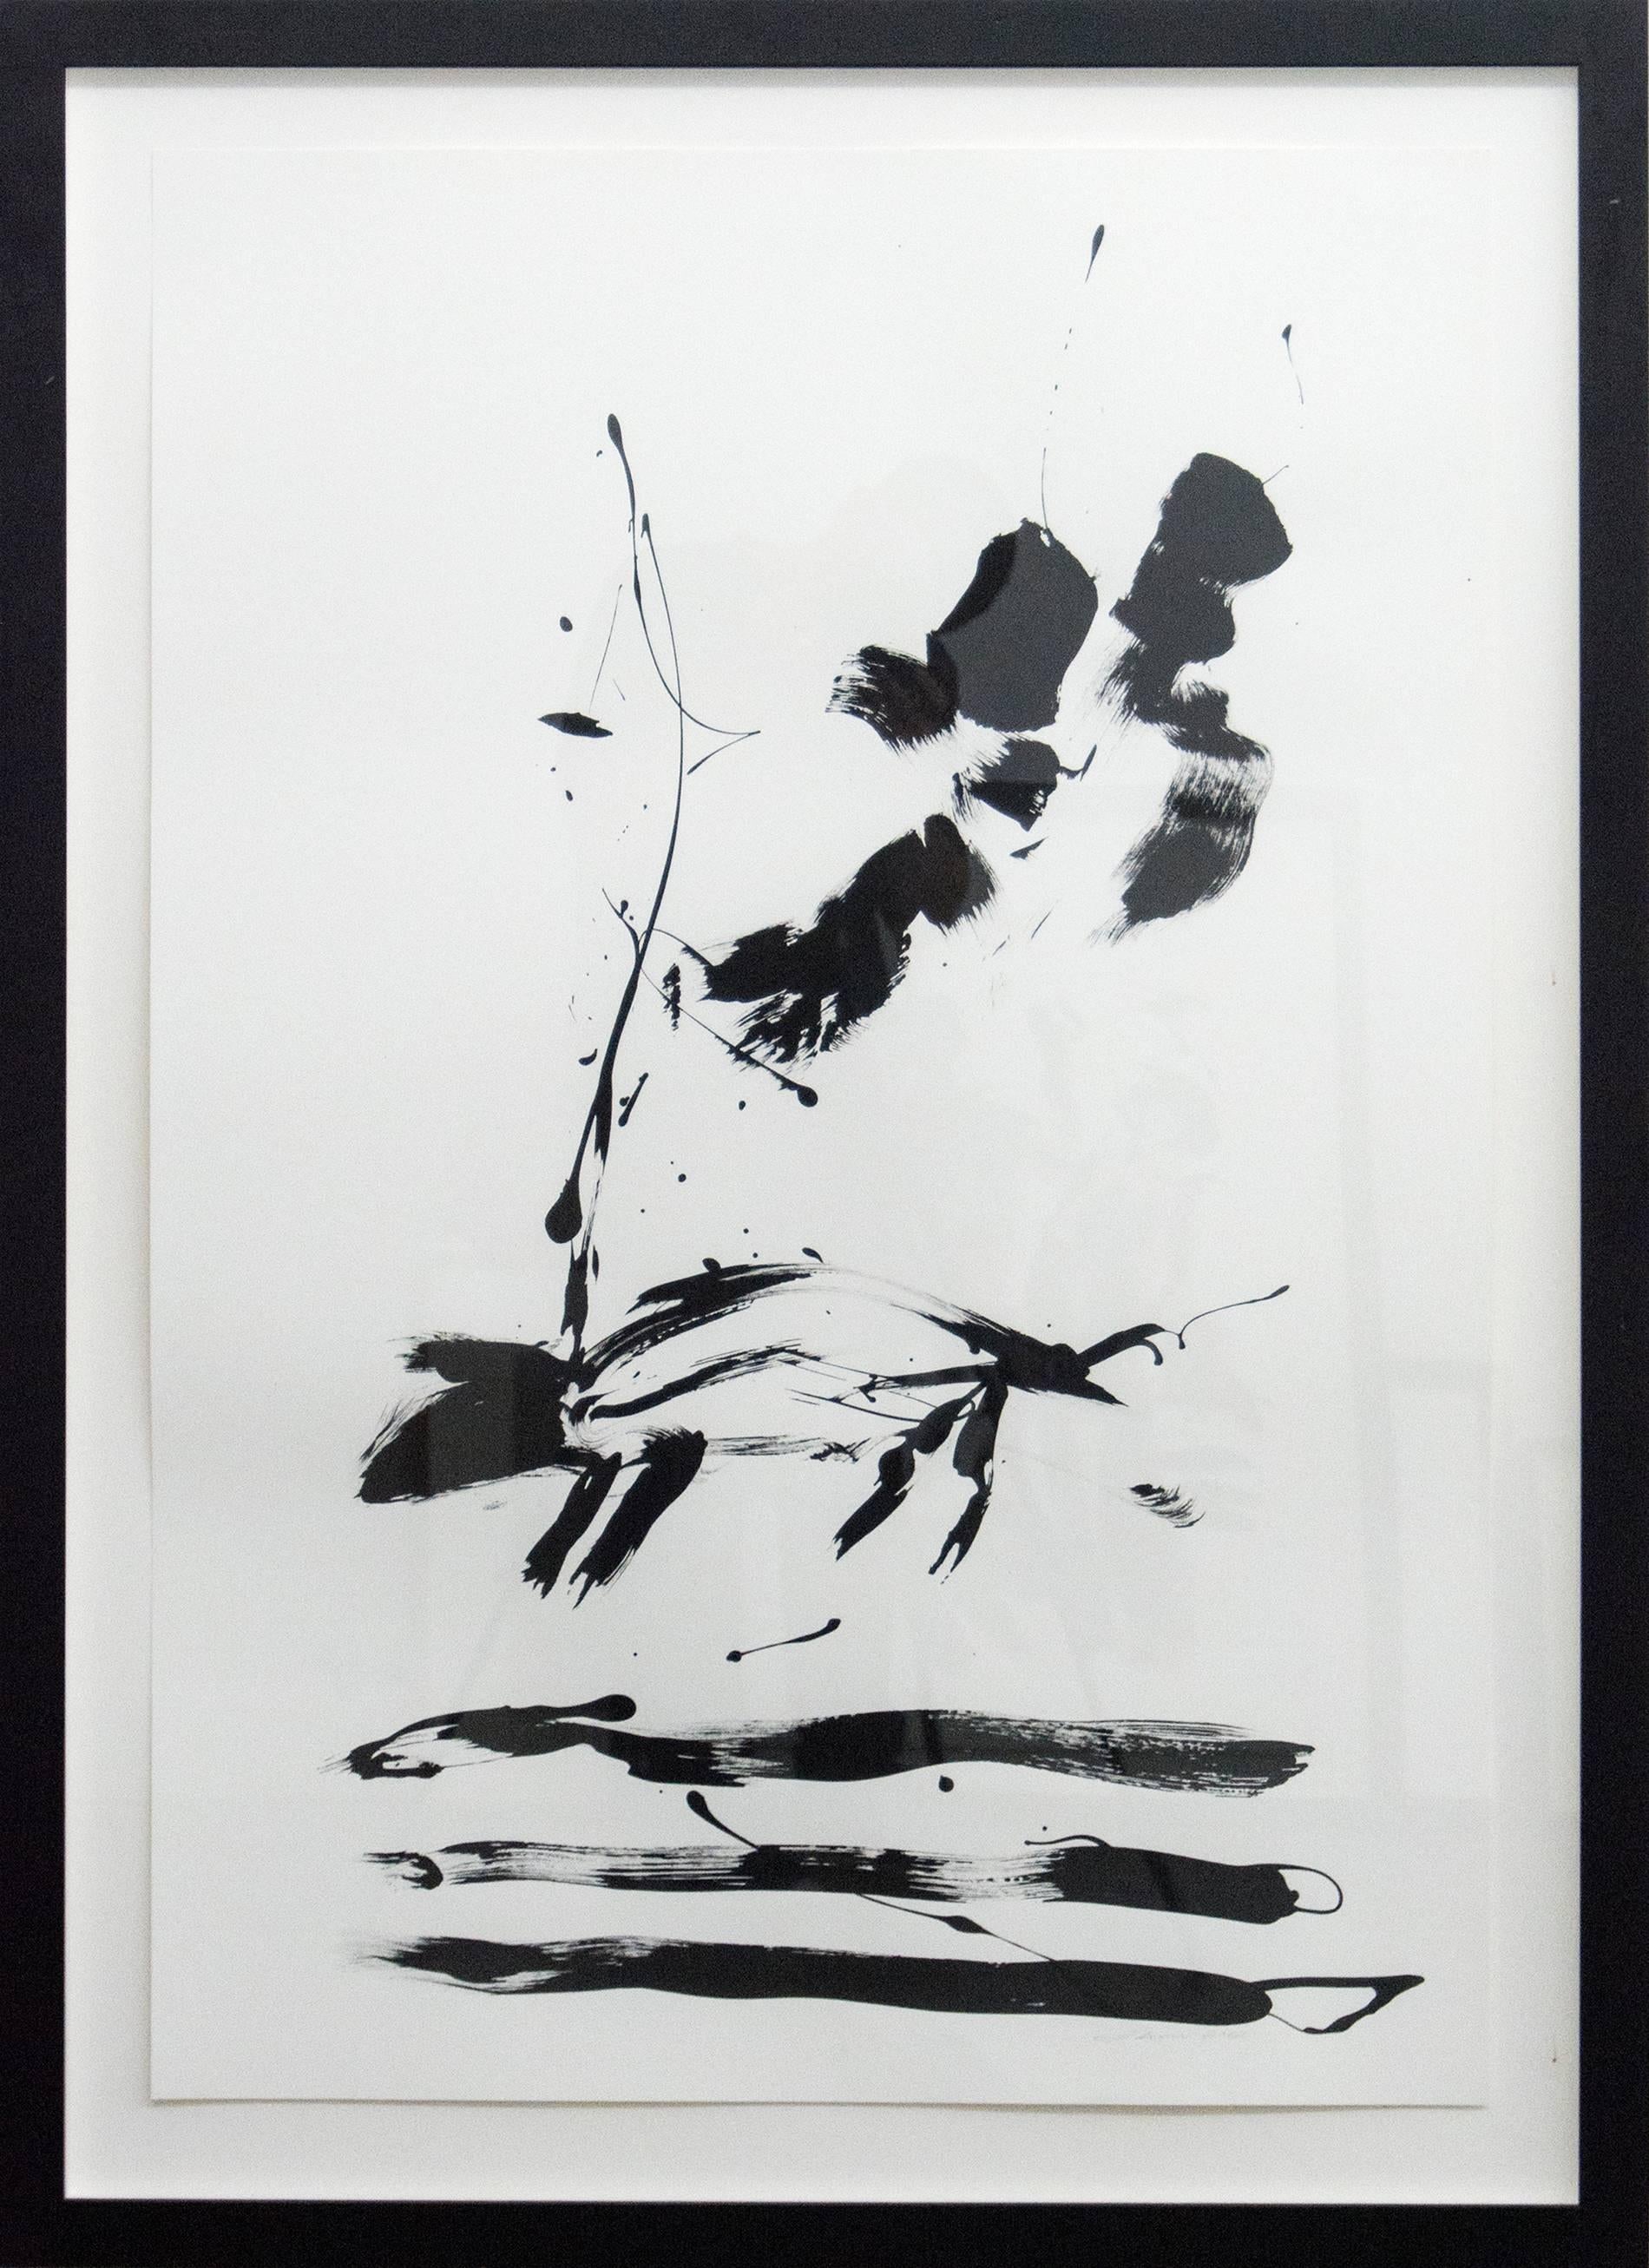 Off the Leash - black & white, minimalist, figurative abstract, ink on paper